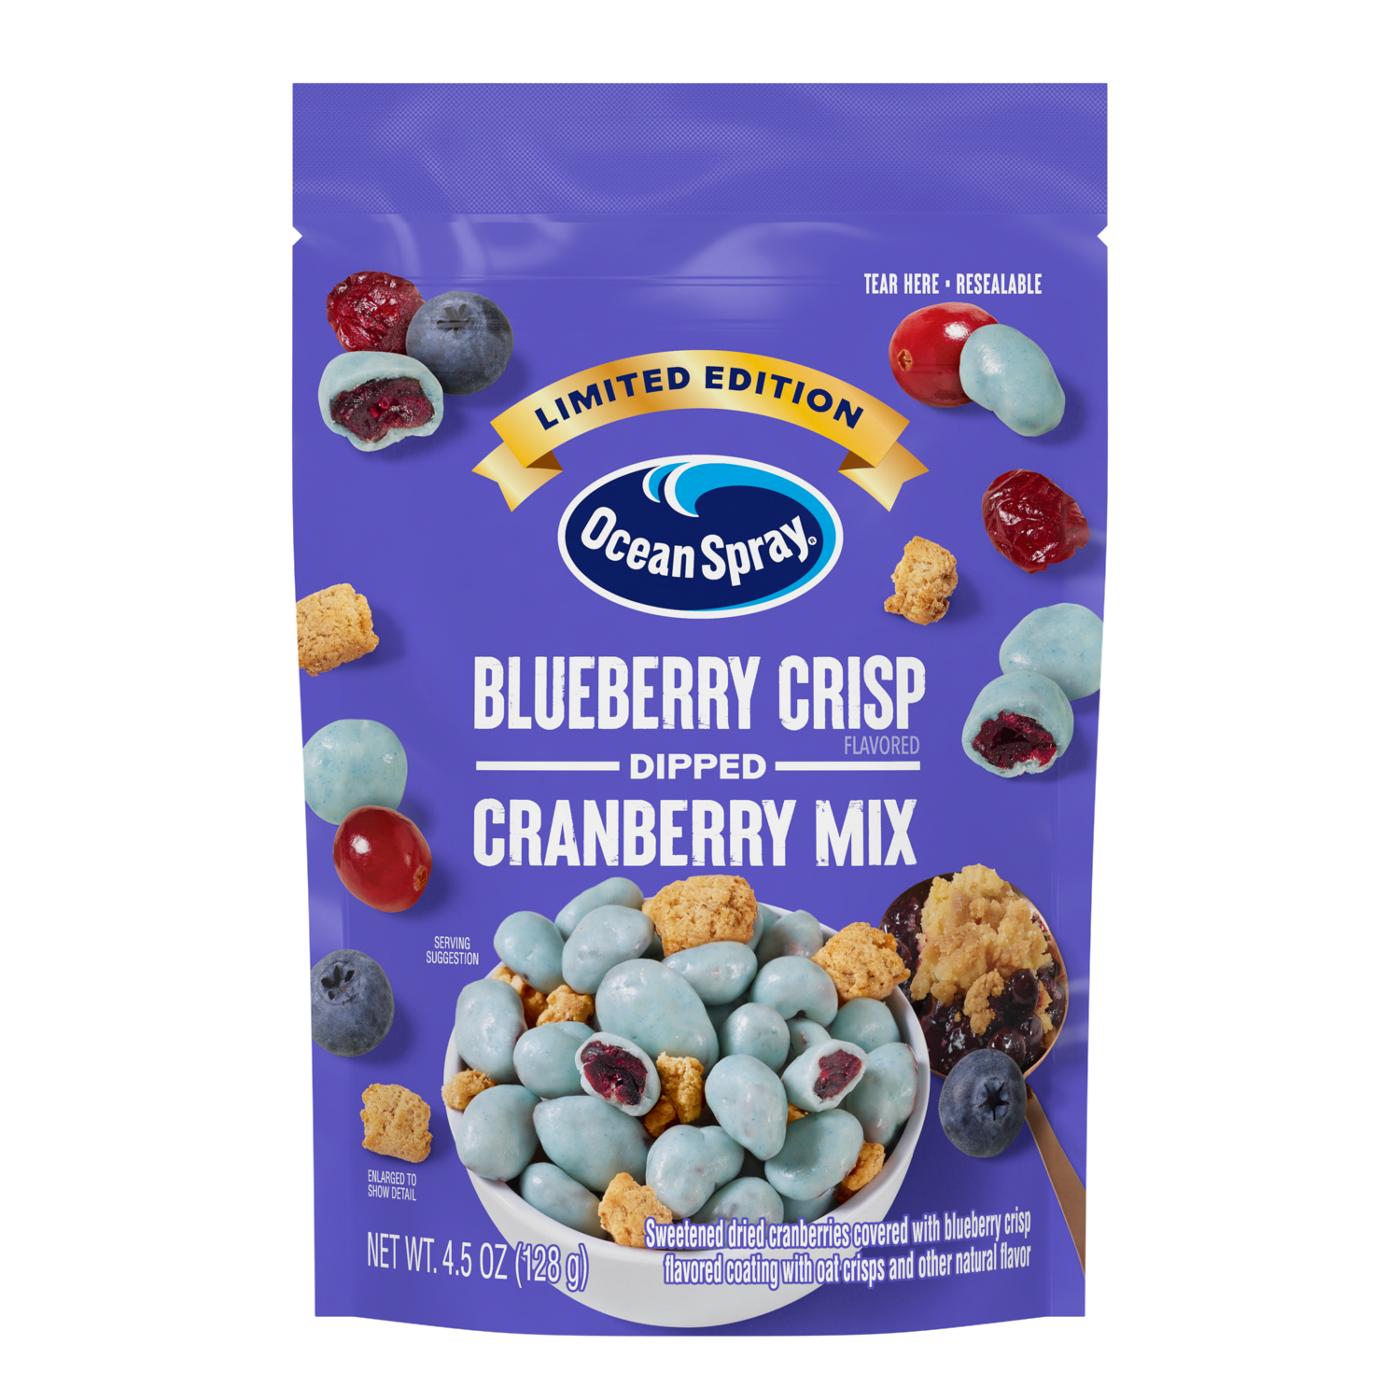 Ocean Spray Blueberry Crisp Dipped Cranberry Mix; image 1 of 4